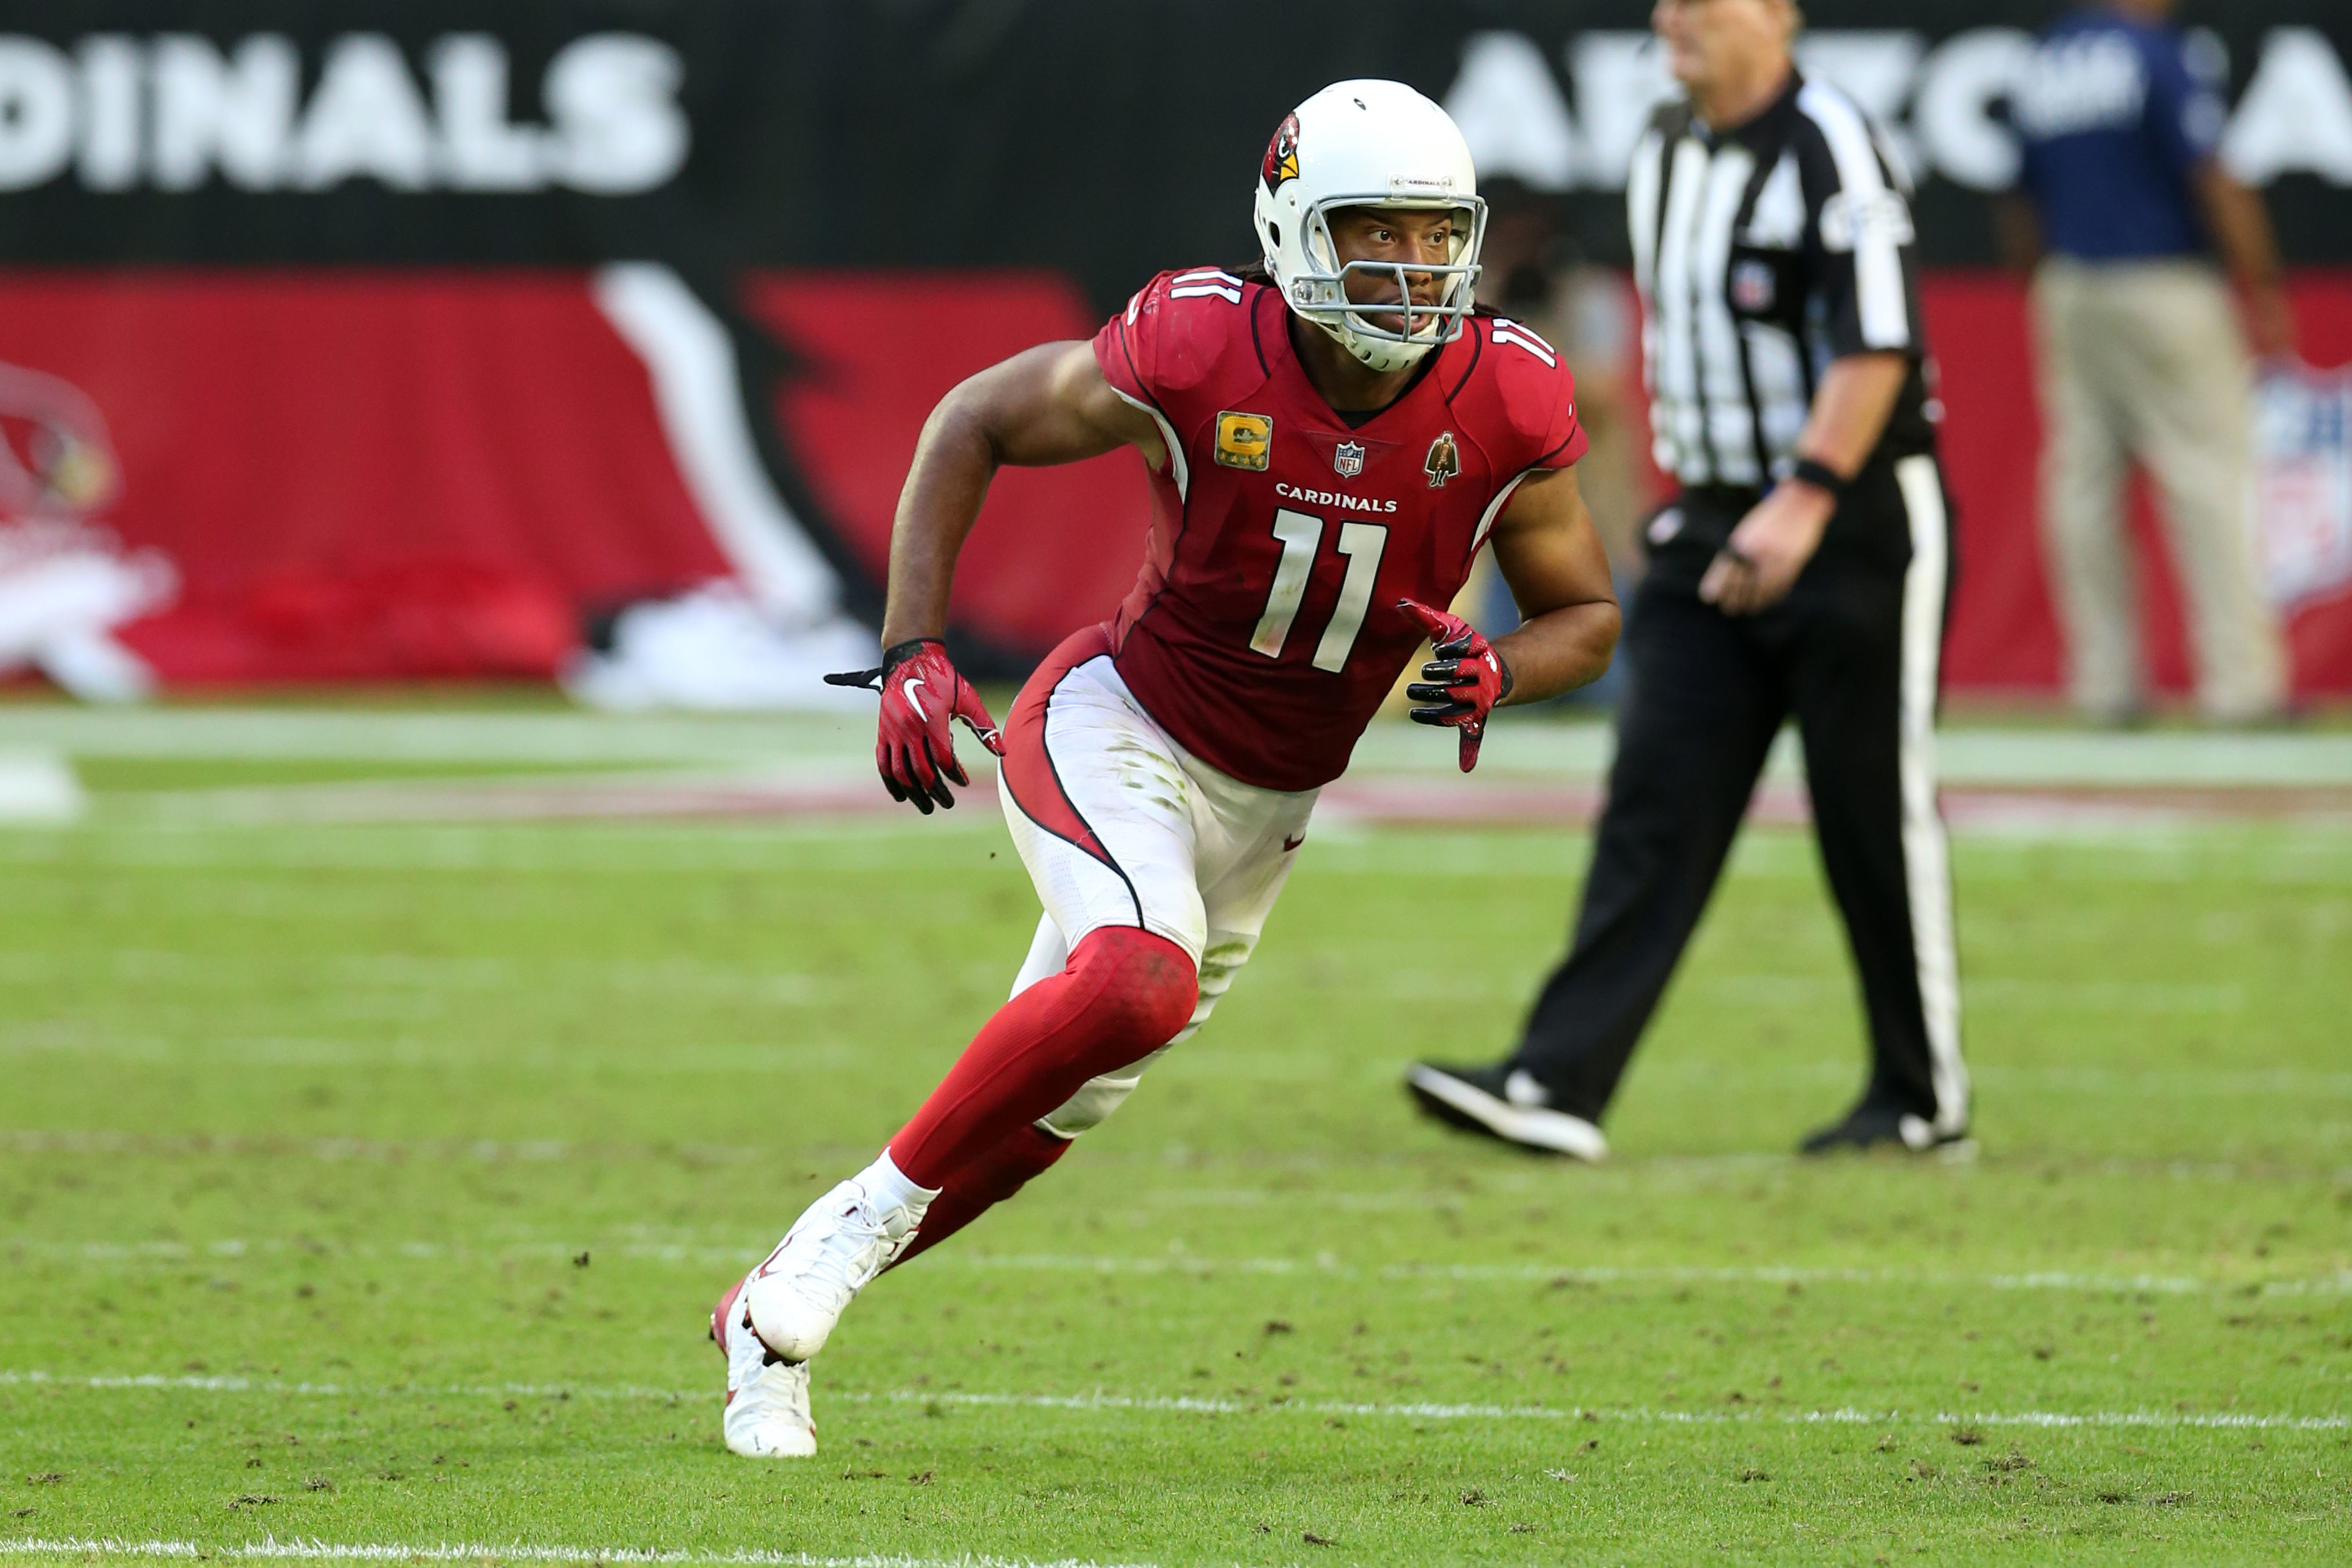 Larry Fitzgerald Has More Tackles Than He Does Dropped Passes in His Hall of Fame Career